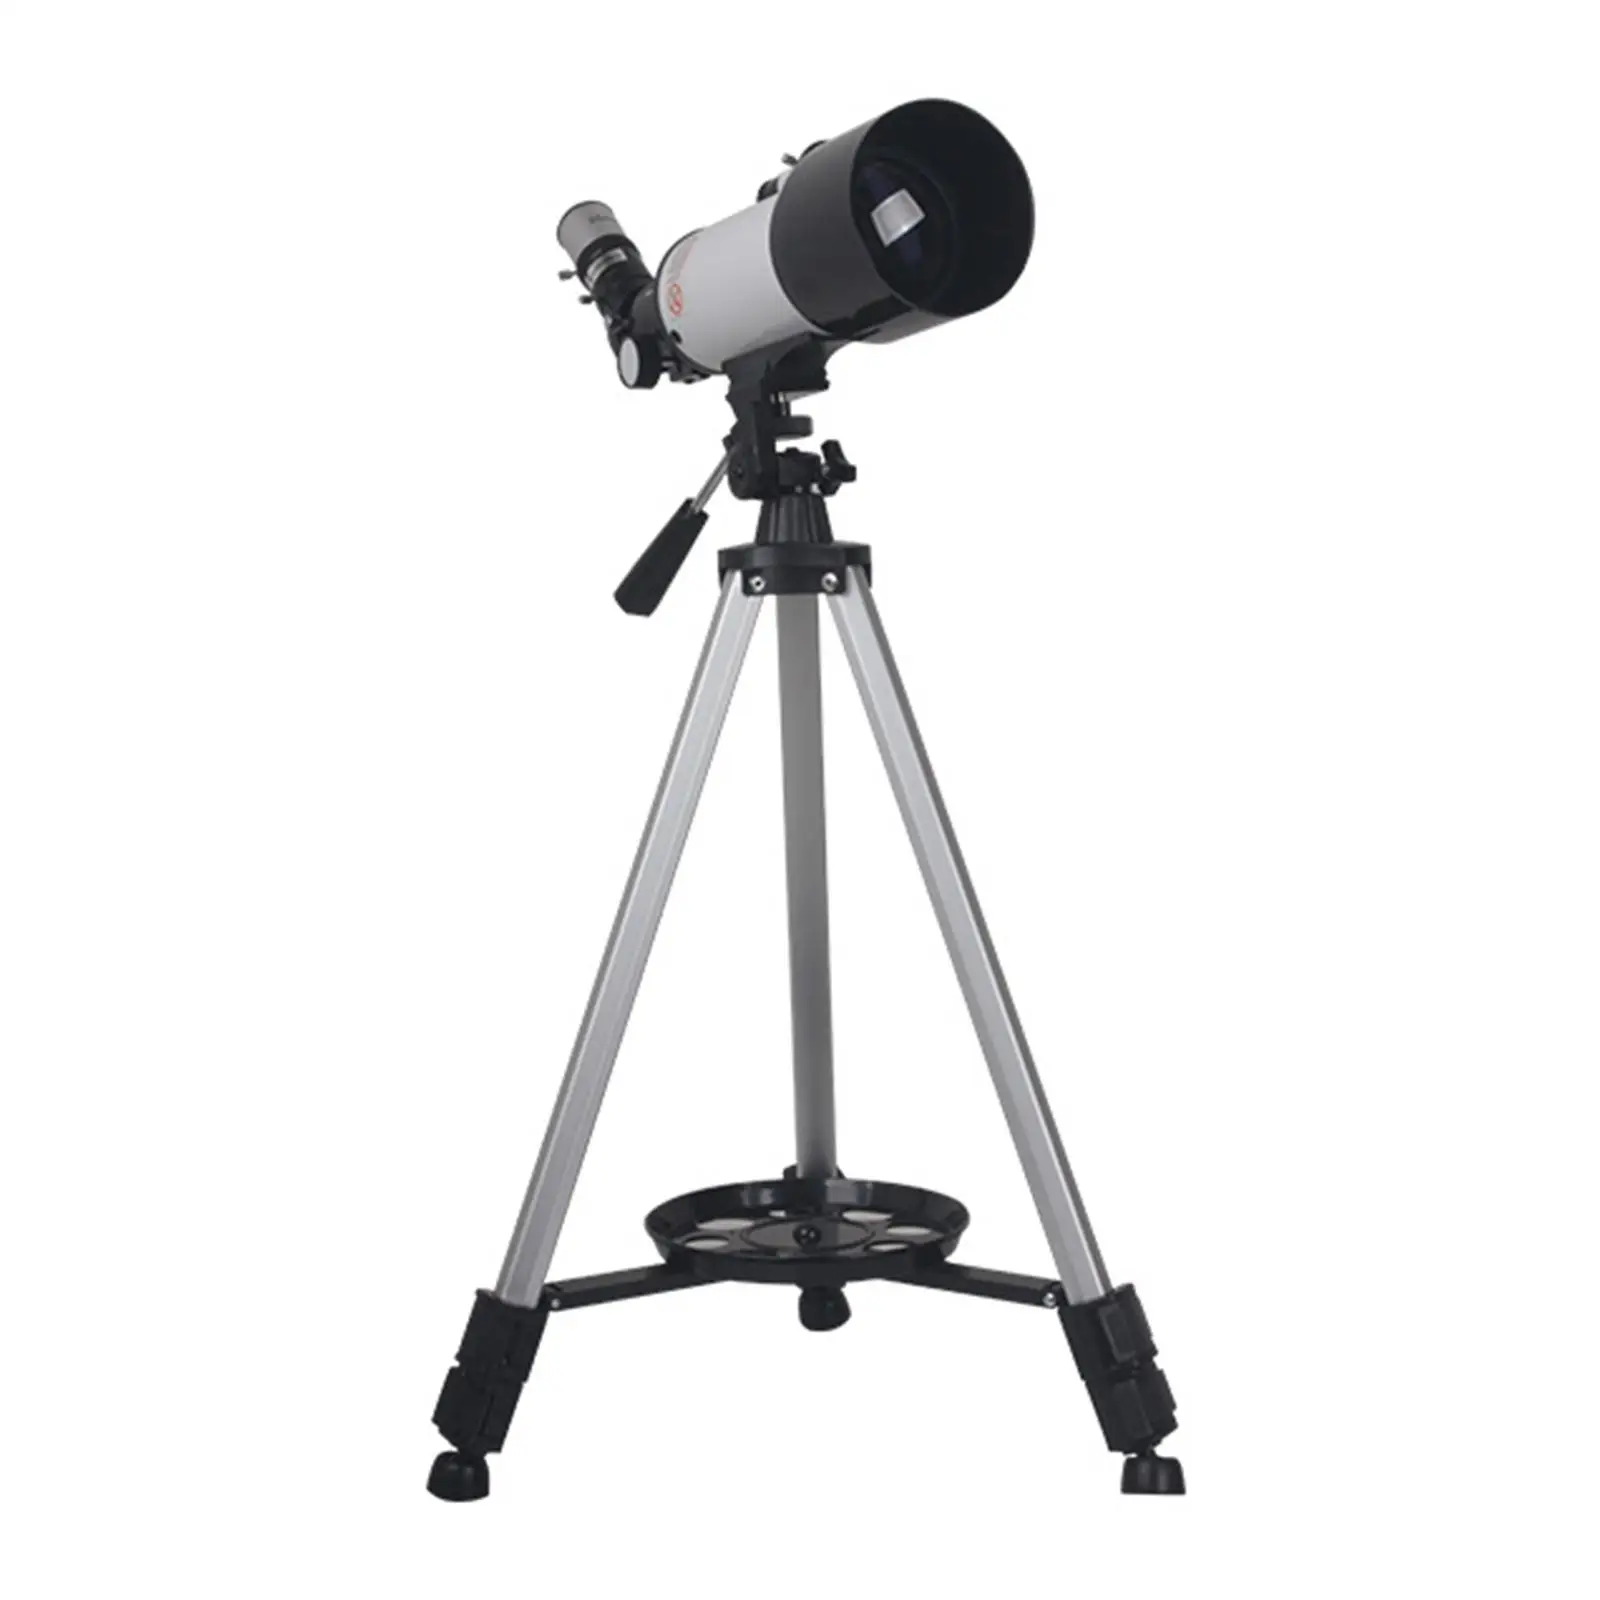 70mm 400mm Telescope for Beginners Aluminum Alloy Tripod for Wathcing Wildlife and Landscapes During The Day Durable Accessories